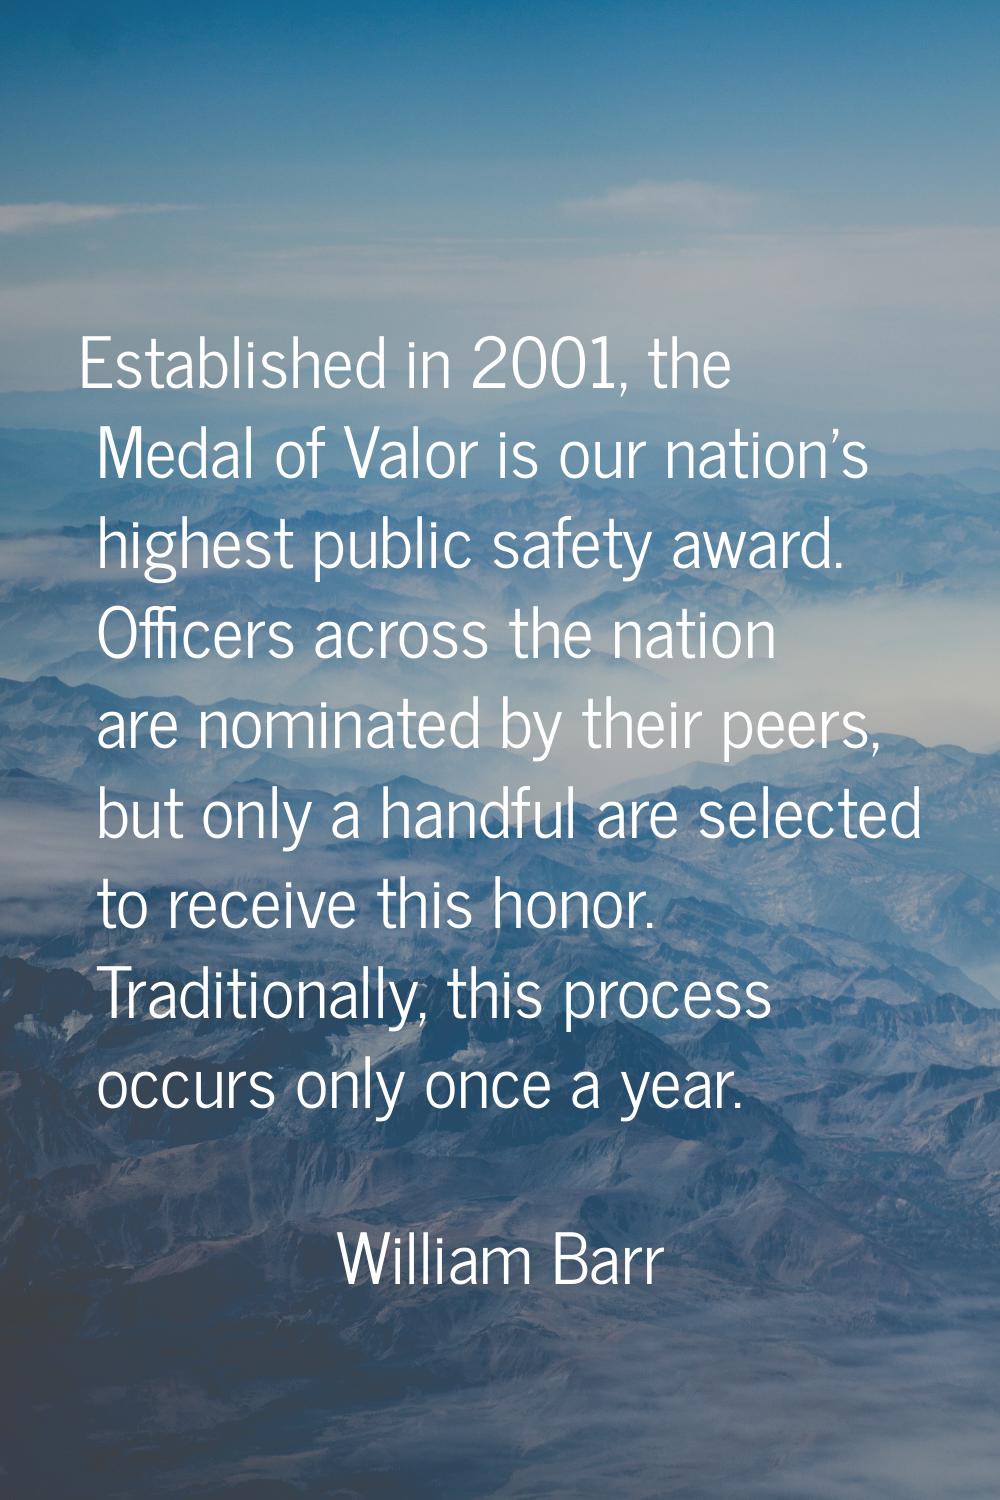 Established in 2001, the Medal of Valor is our nation's highest public safety award. Officers acros